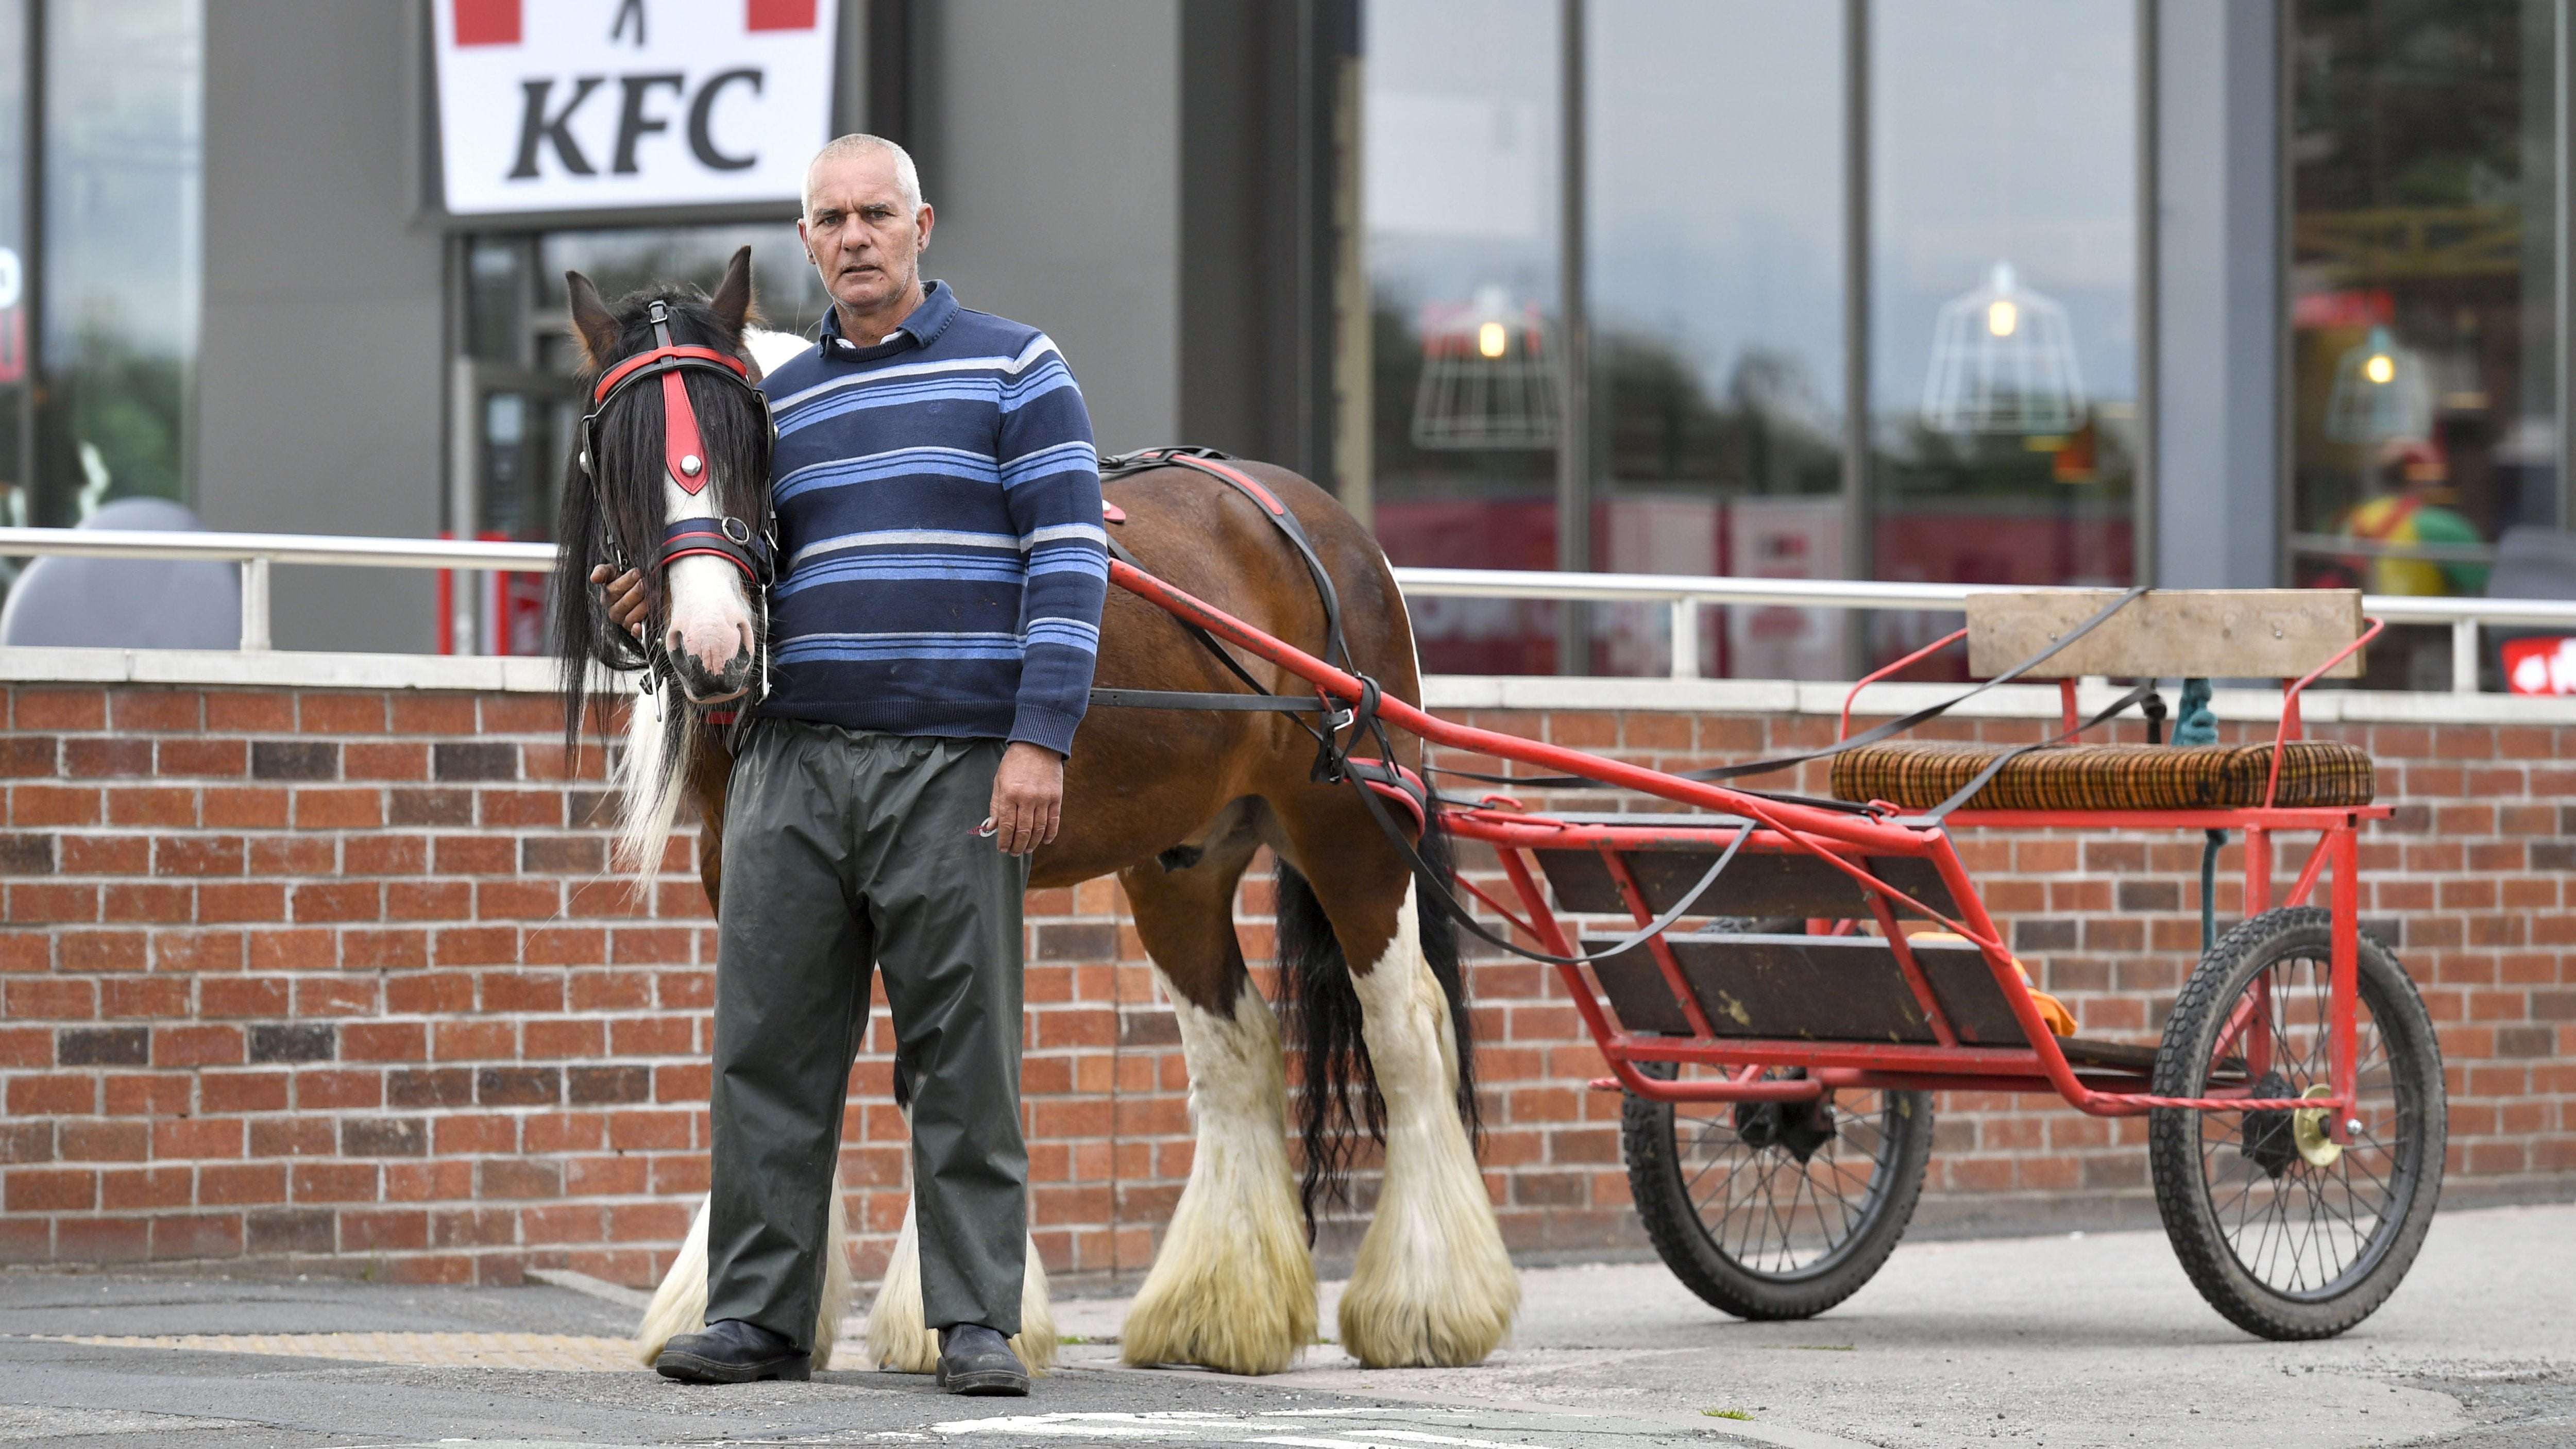 image for Man in horse-drawn carriage kicked out of KFC drive-thru